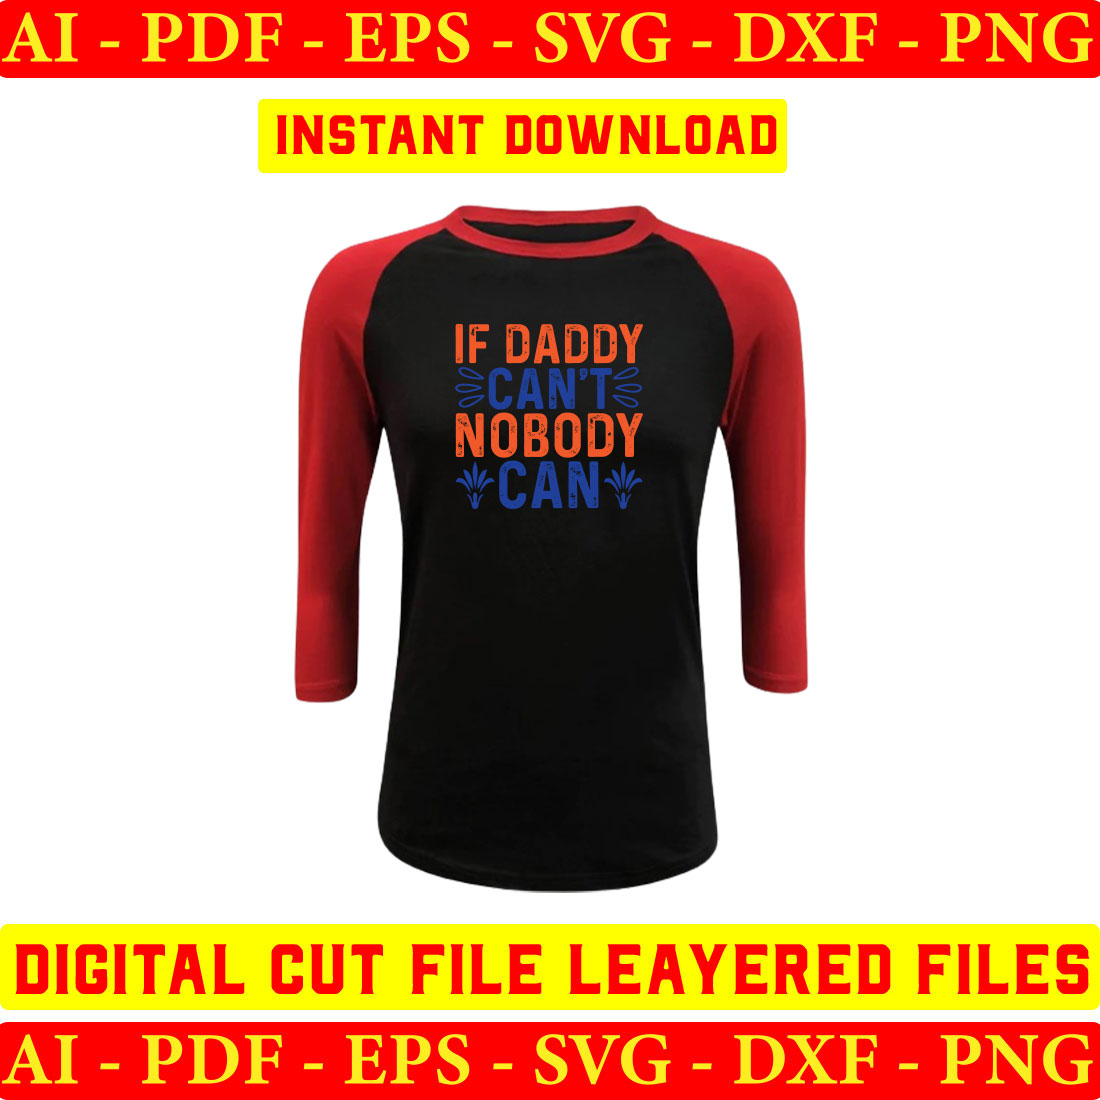 Black and red baseball shirt with the words if daddy can't nobody can.